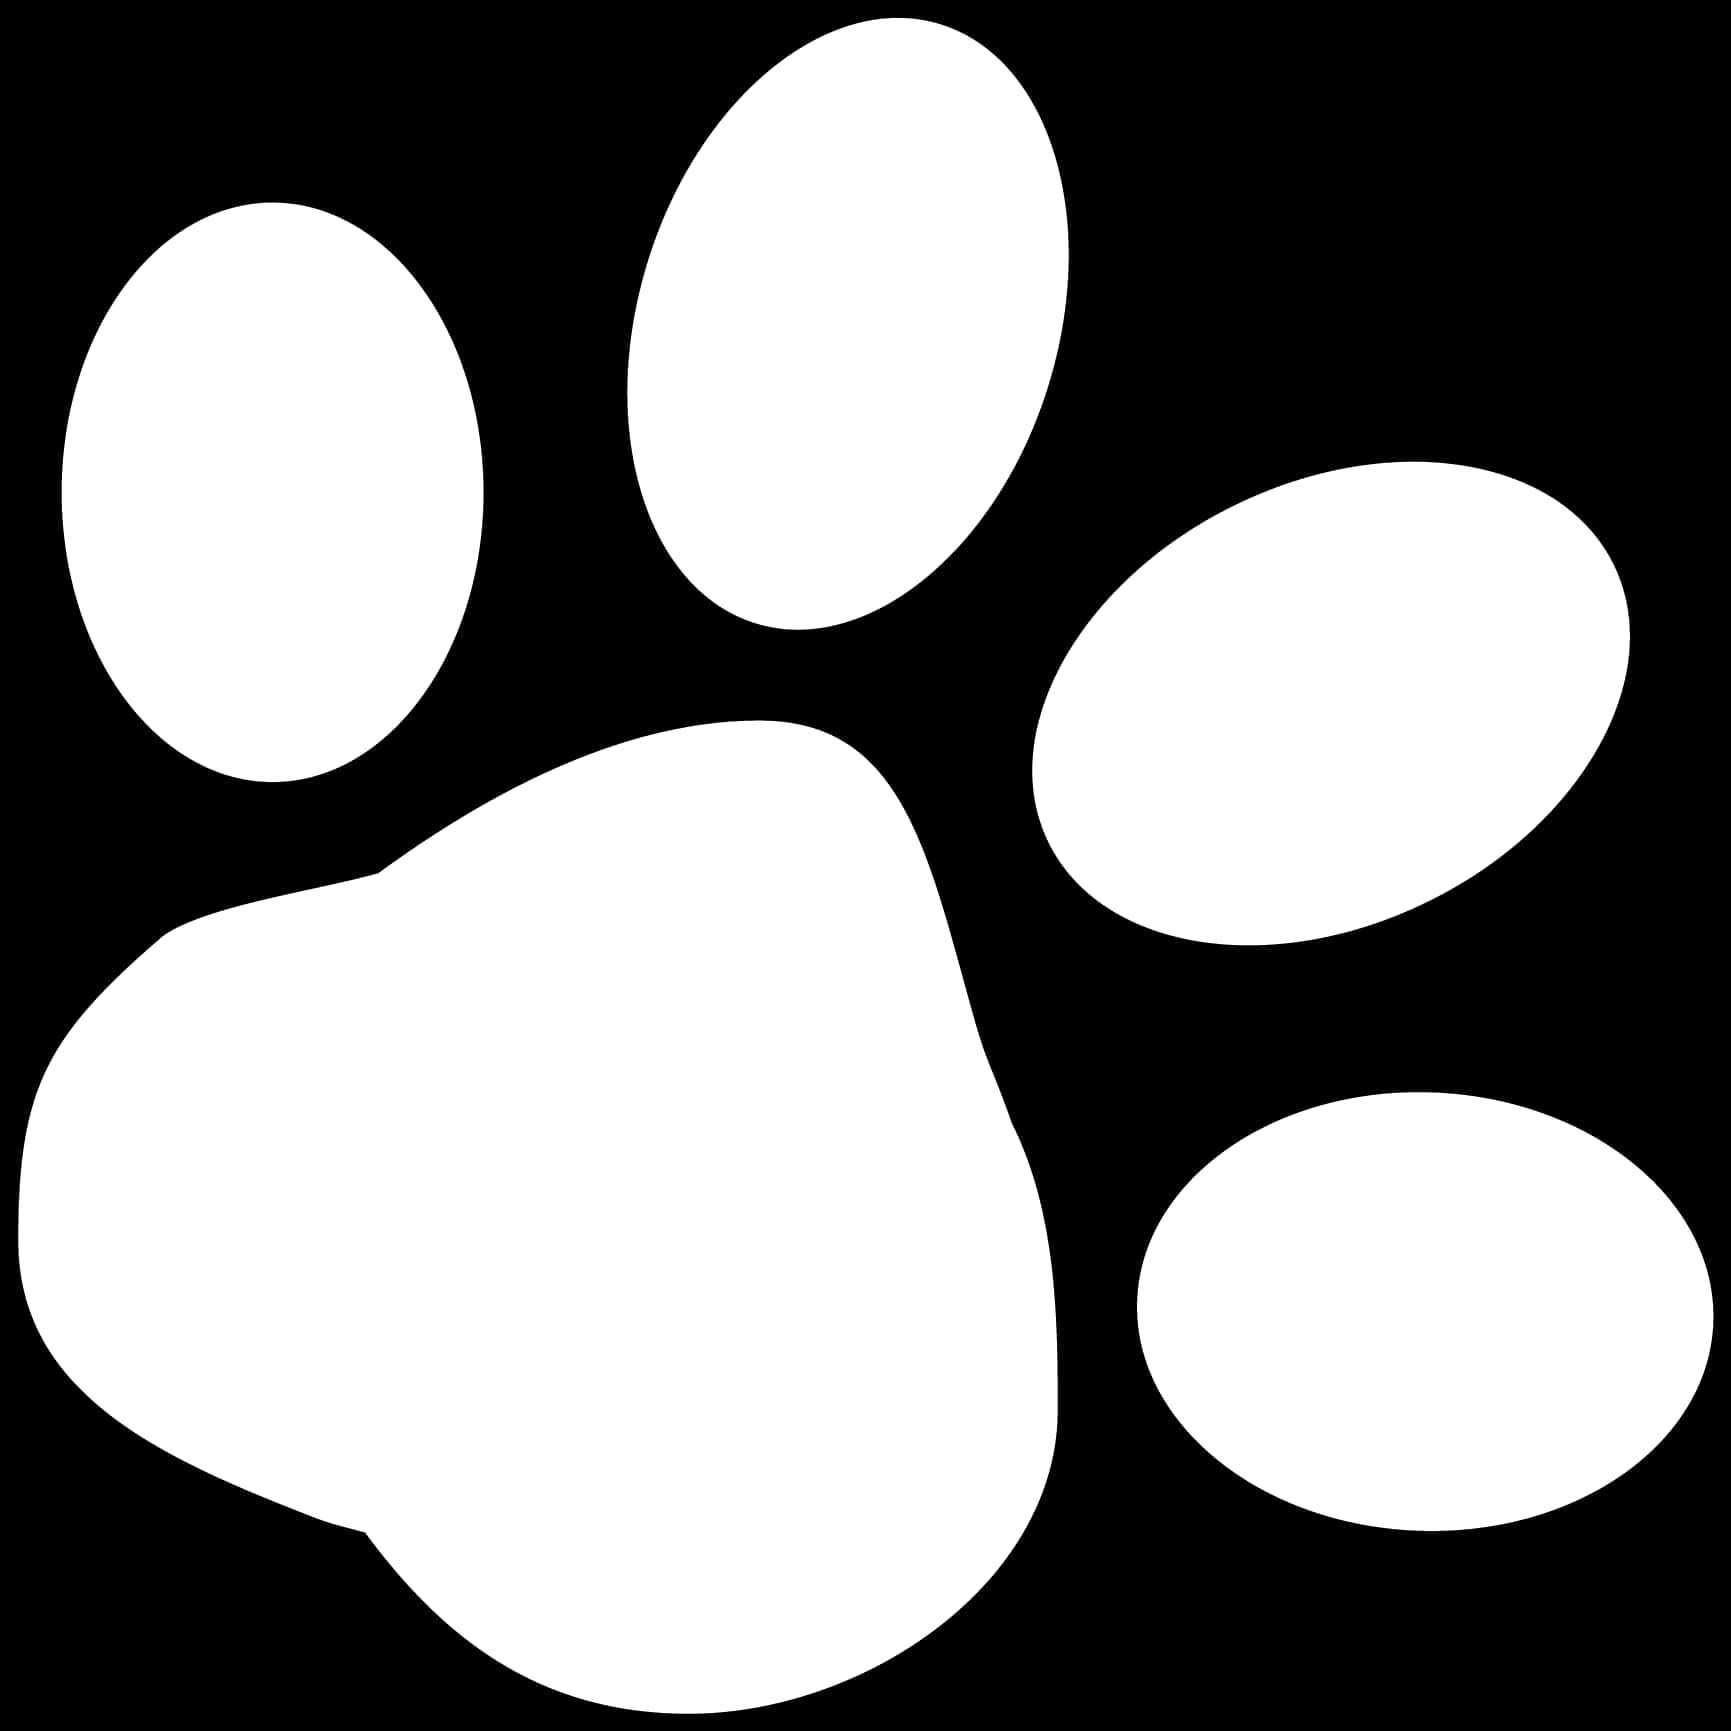 A White Paw Print On A Black Background PNG